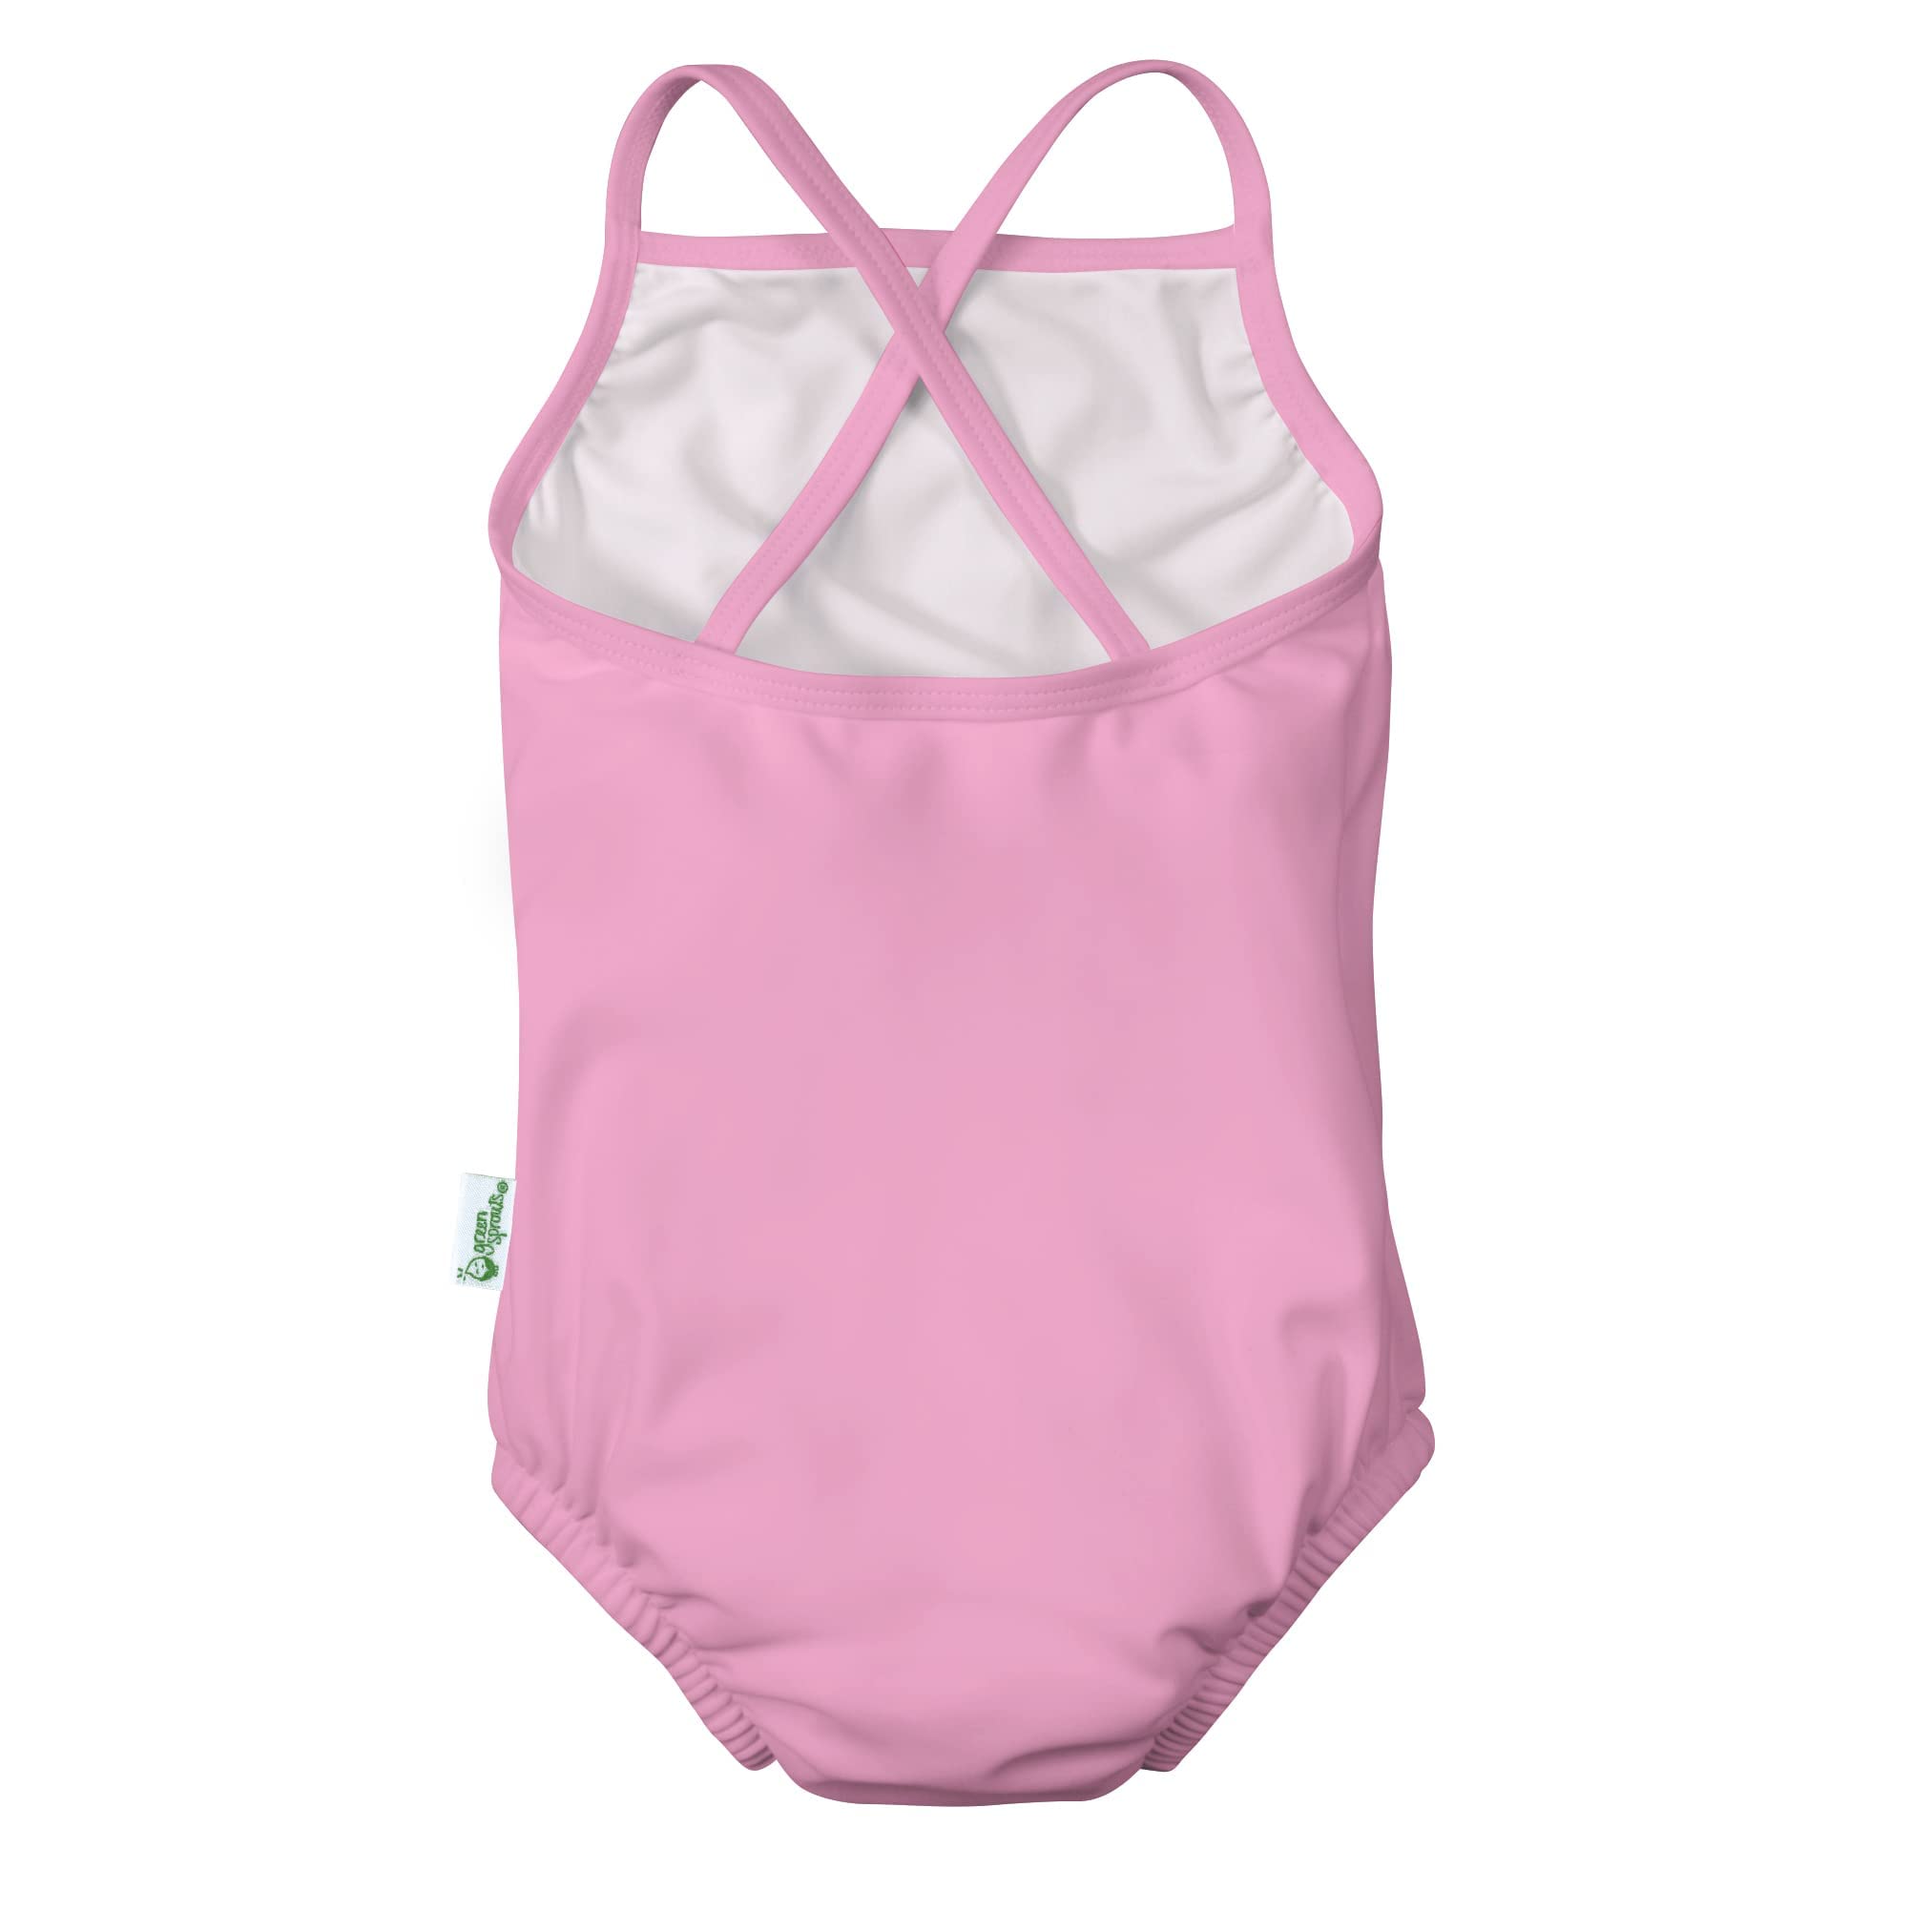 i play. by Green Sprouts One-Piece Swimsuit with Built in Reusable Swim Diaper | Helps Provide Secure Protection for Babies & Swimmers